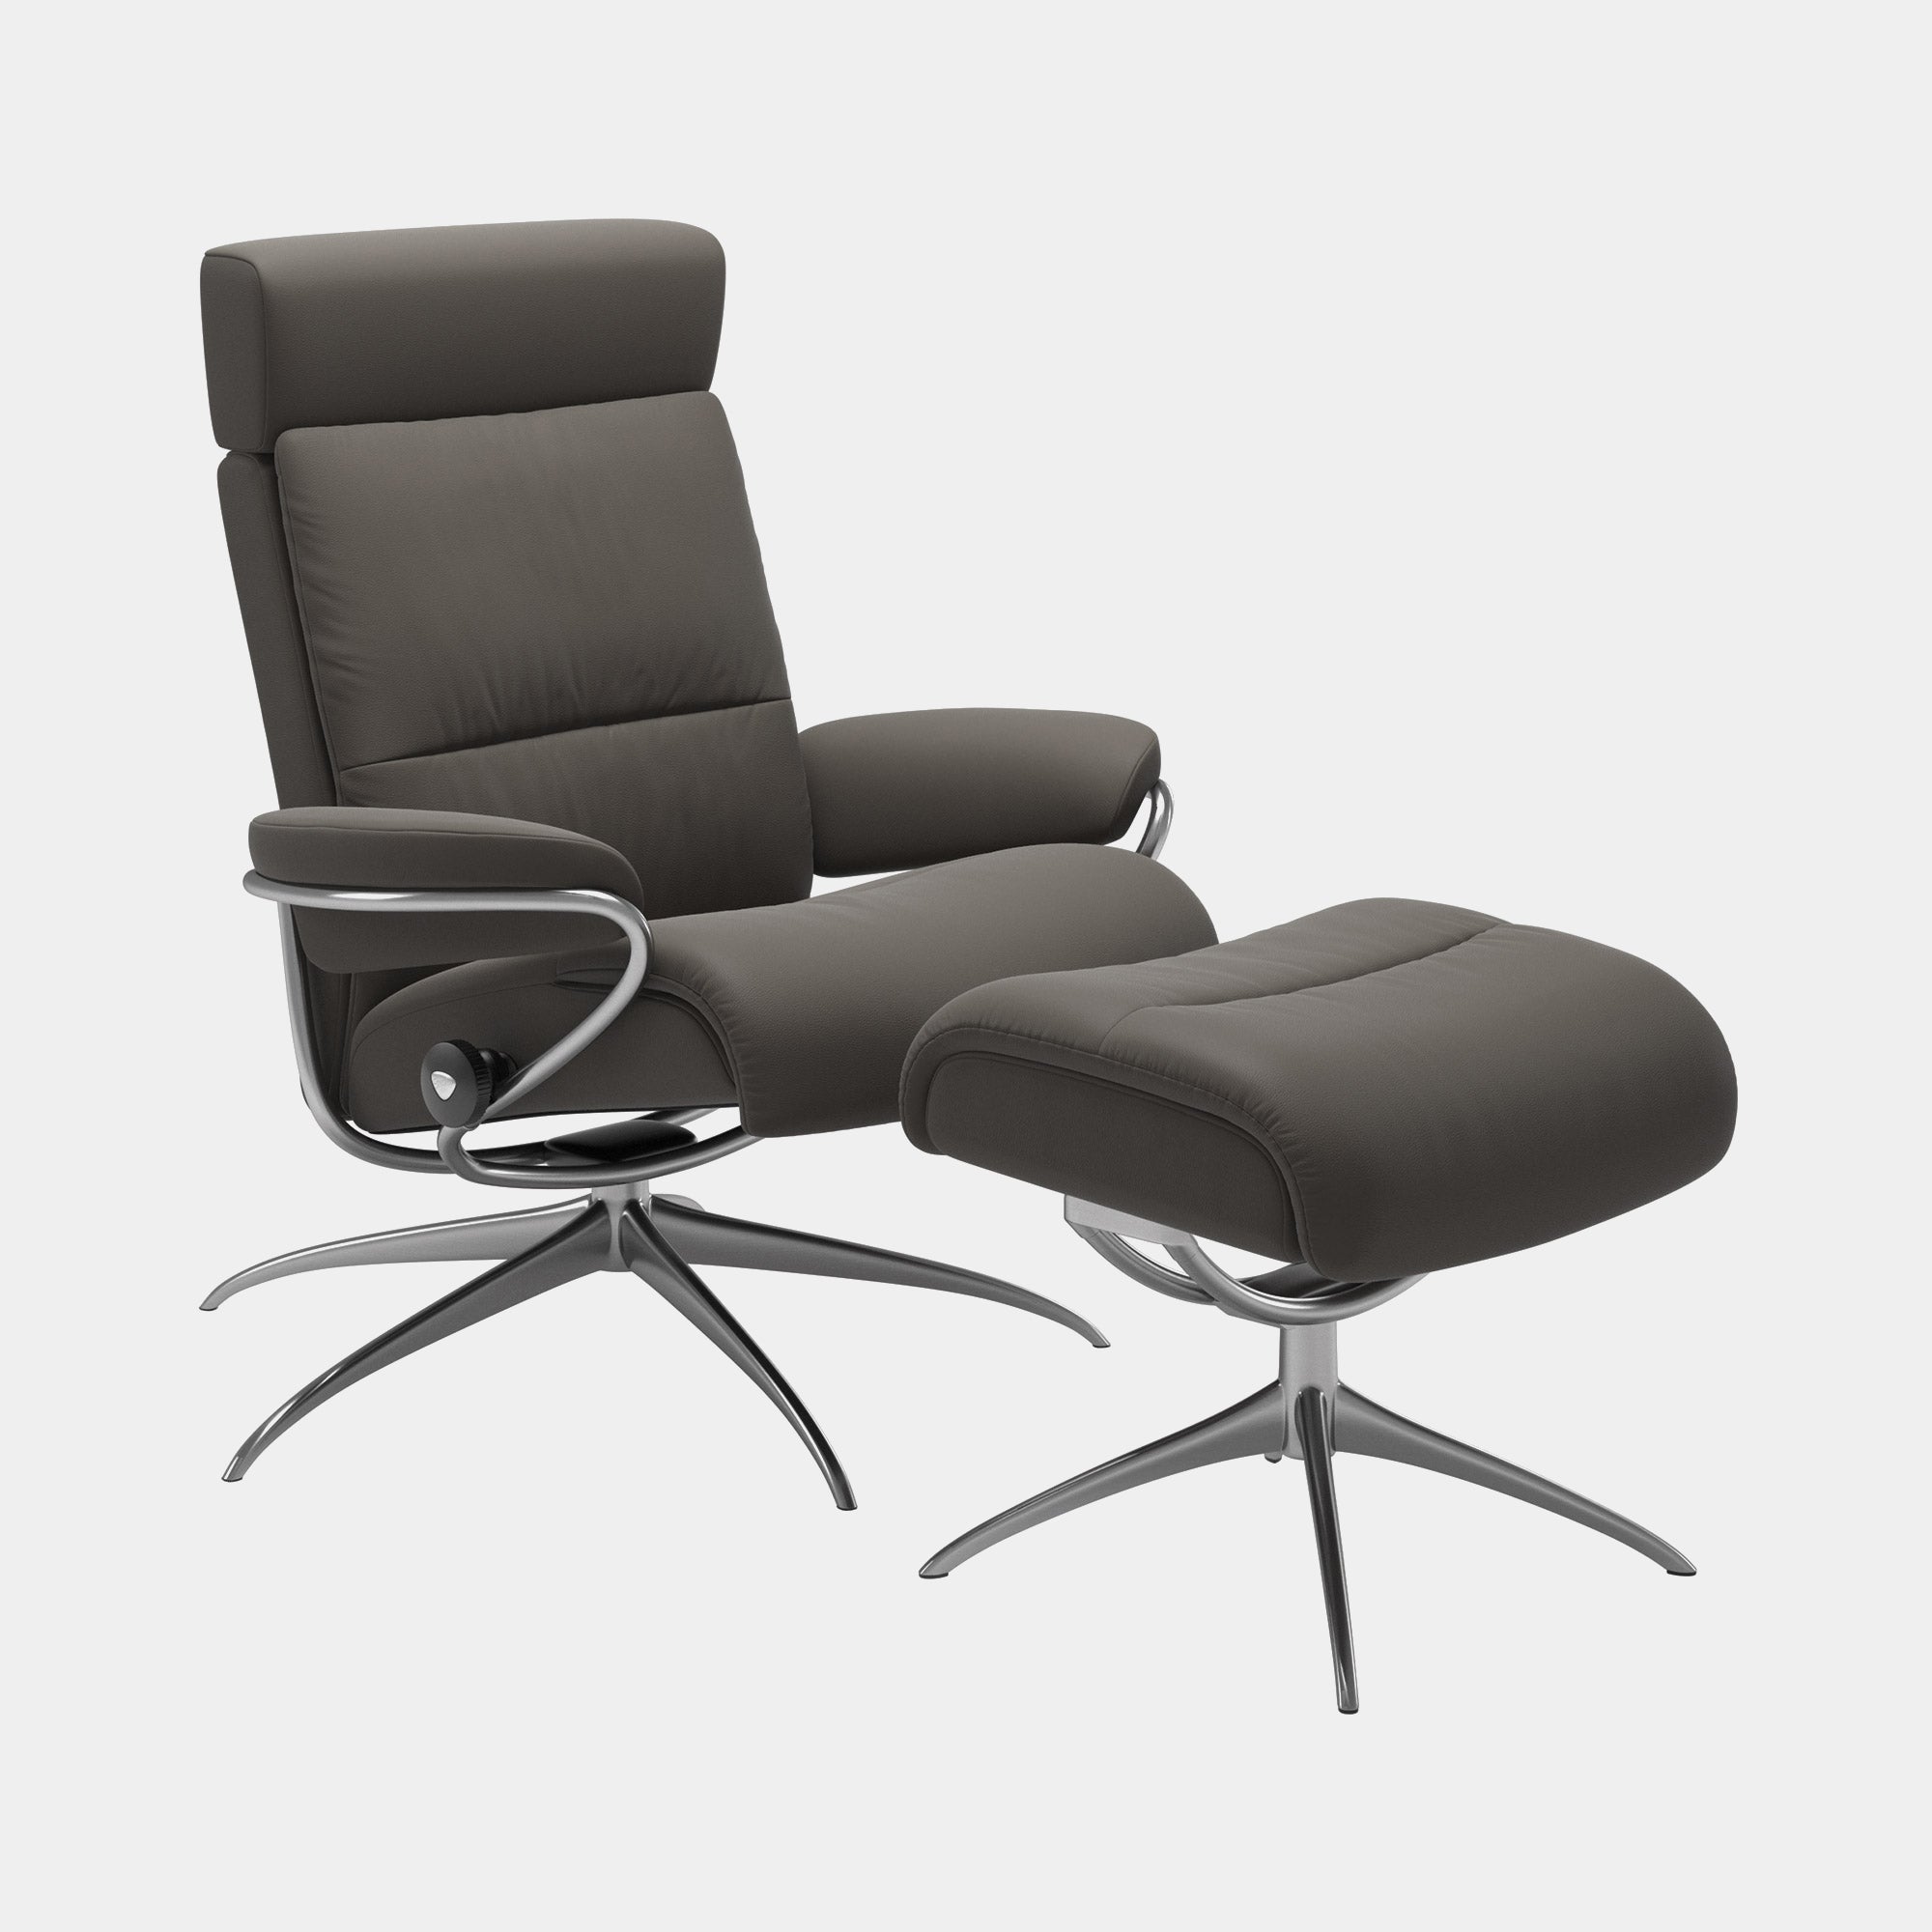 QUICKSHIP - Chair With Footstool With Headrest With Chrome Star Base In Leather Paloma Metal Grey